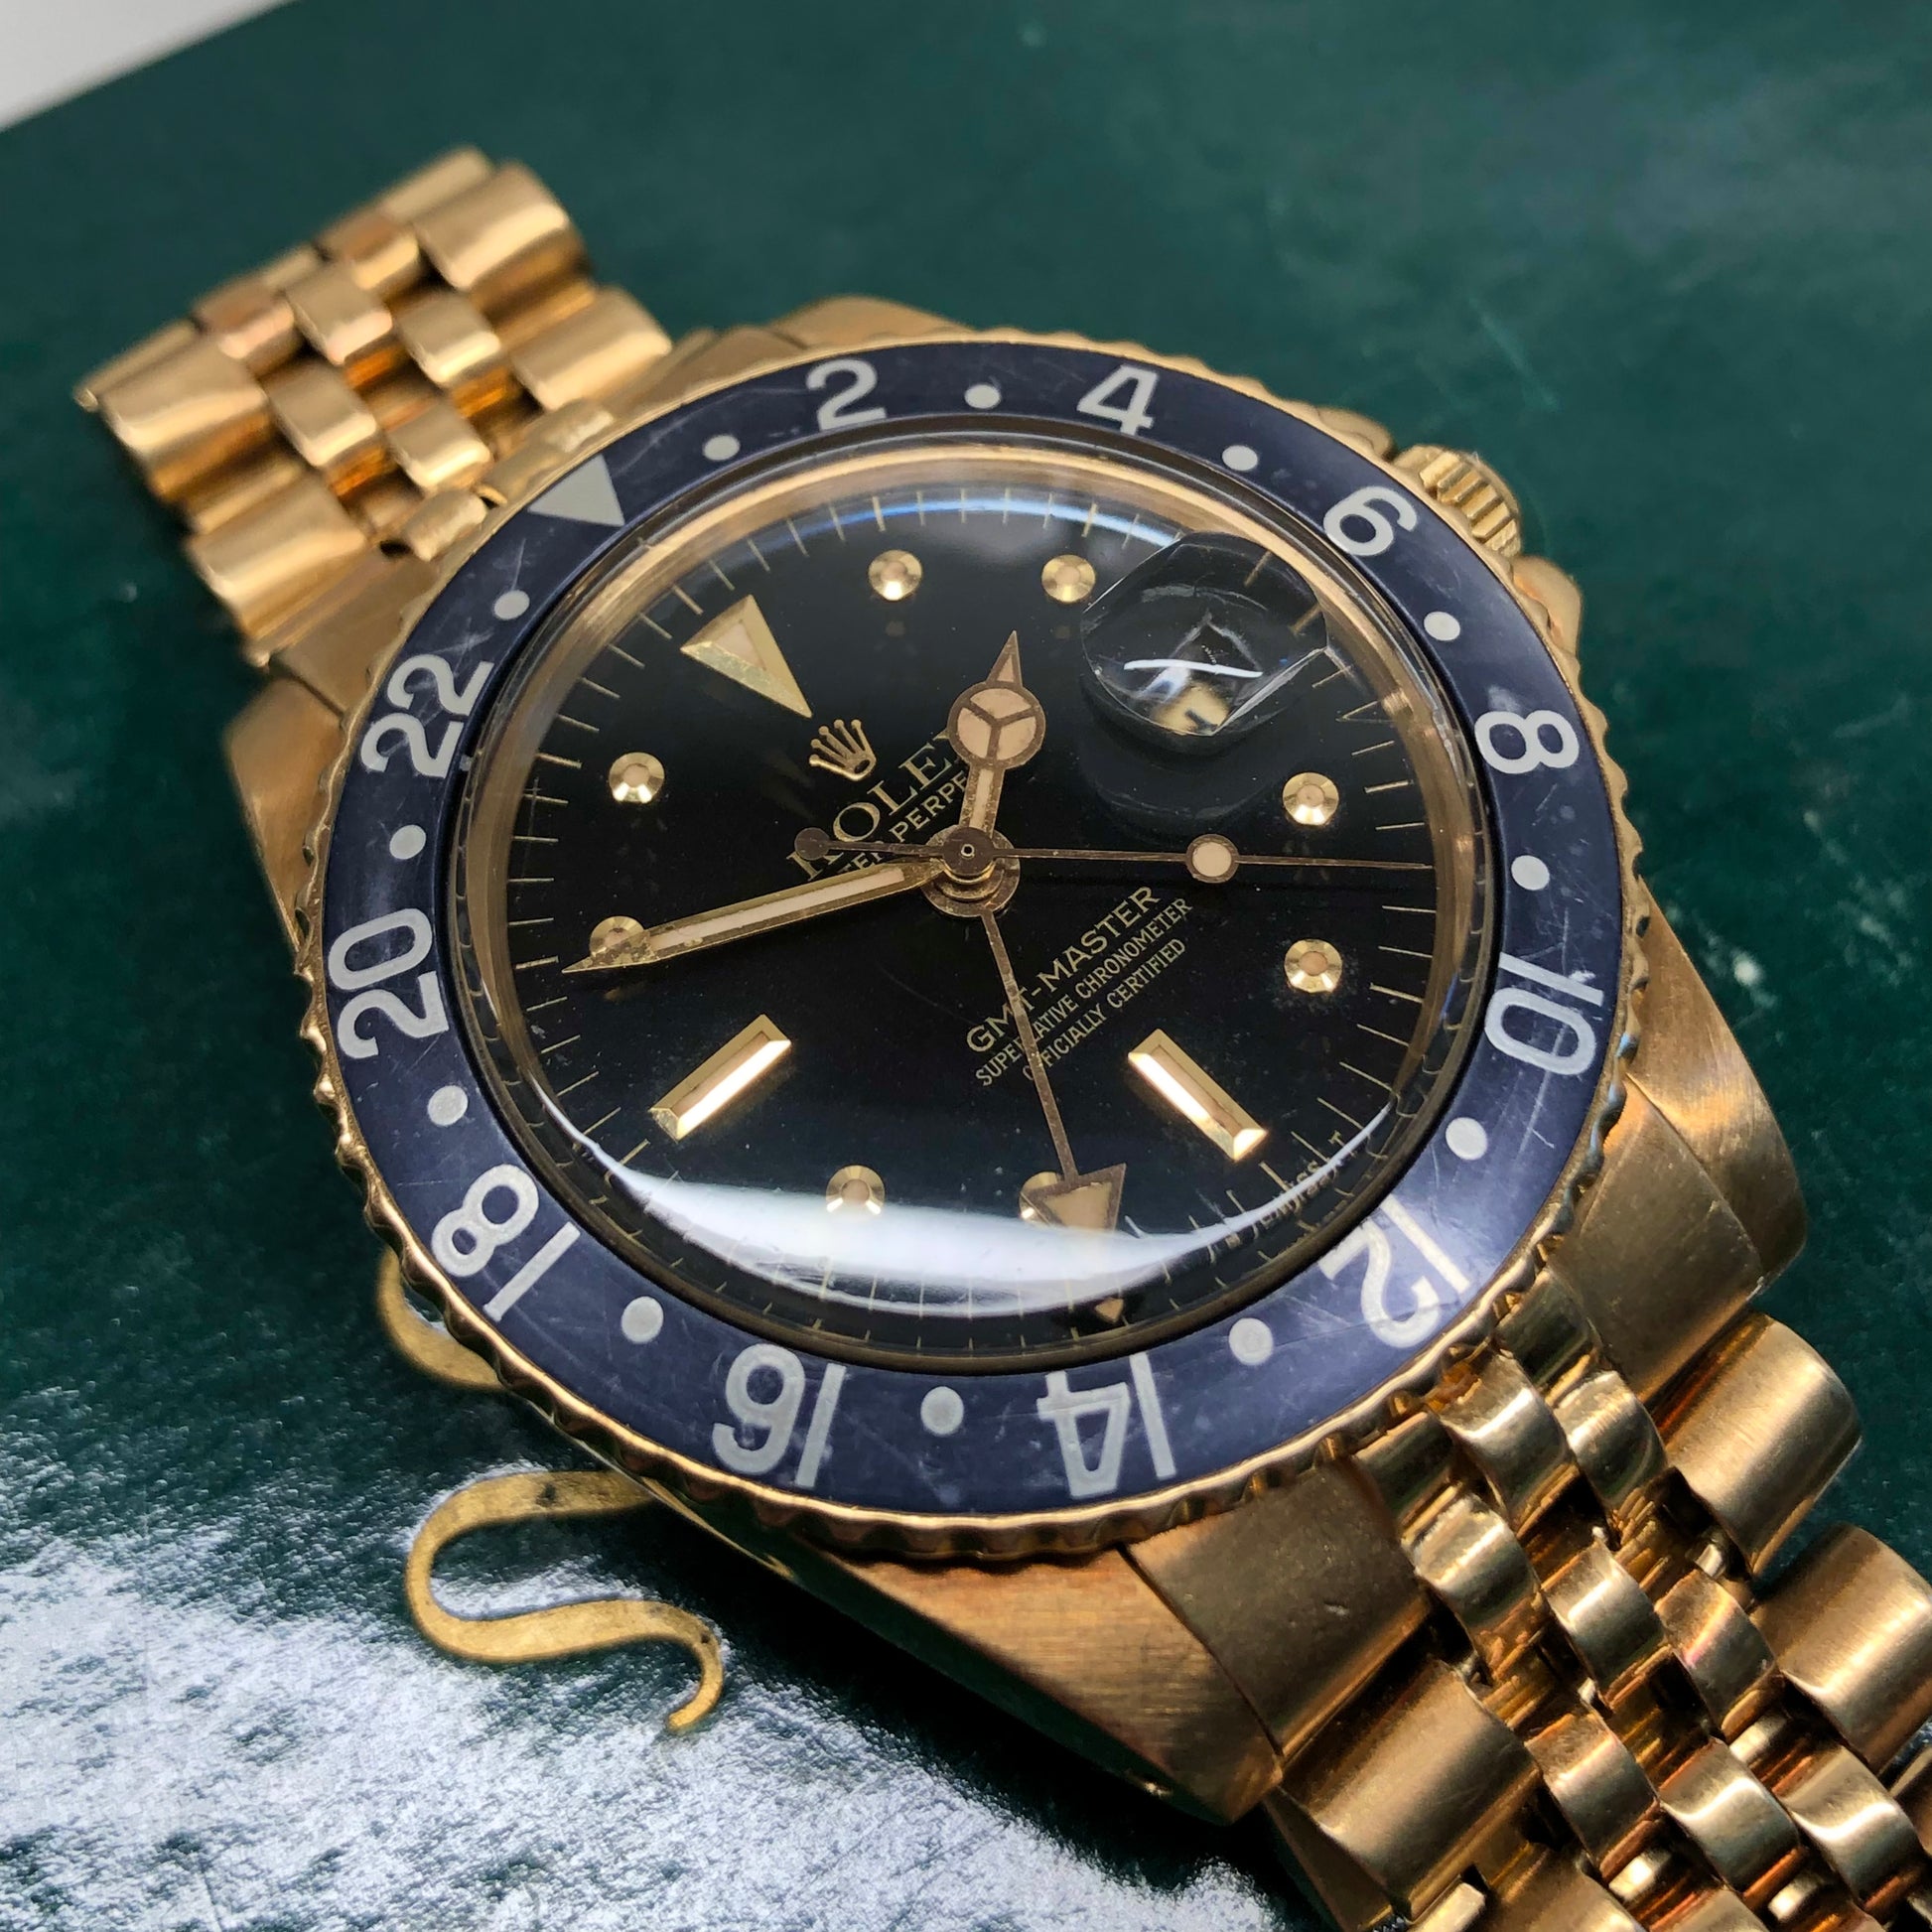 1969 Rolex GMT MASTER 1675 Black Nipple Dial 18K Yellow Gold Automatic Wristwatch - Hashtag Watch Company